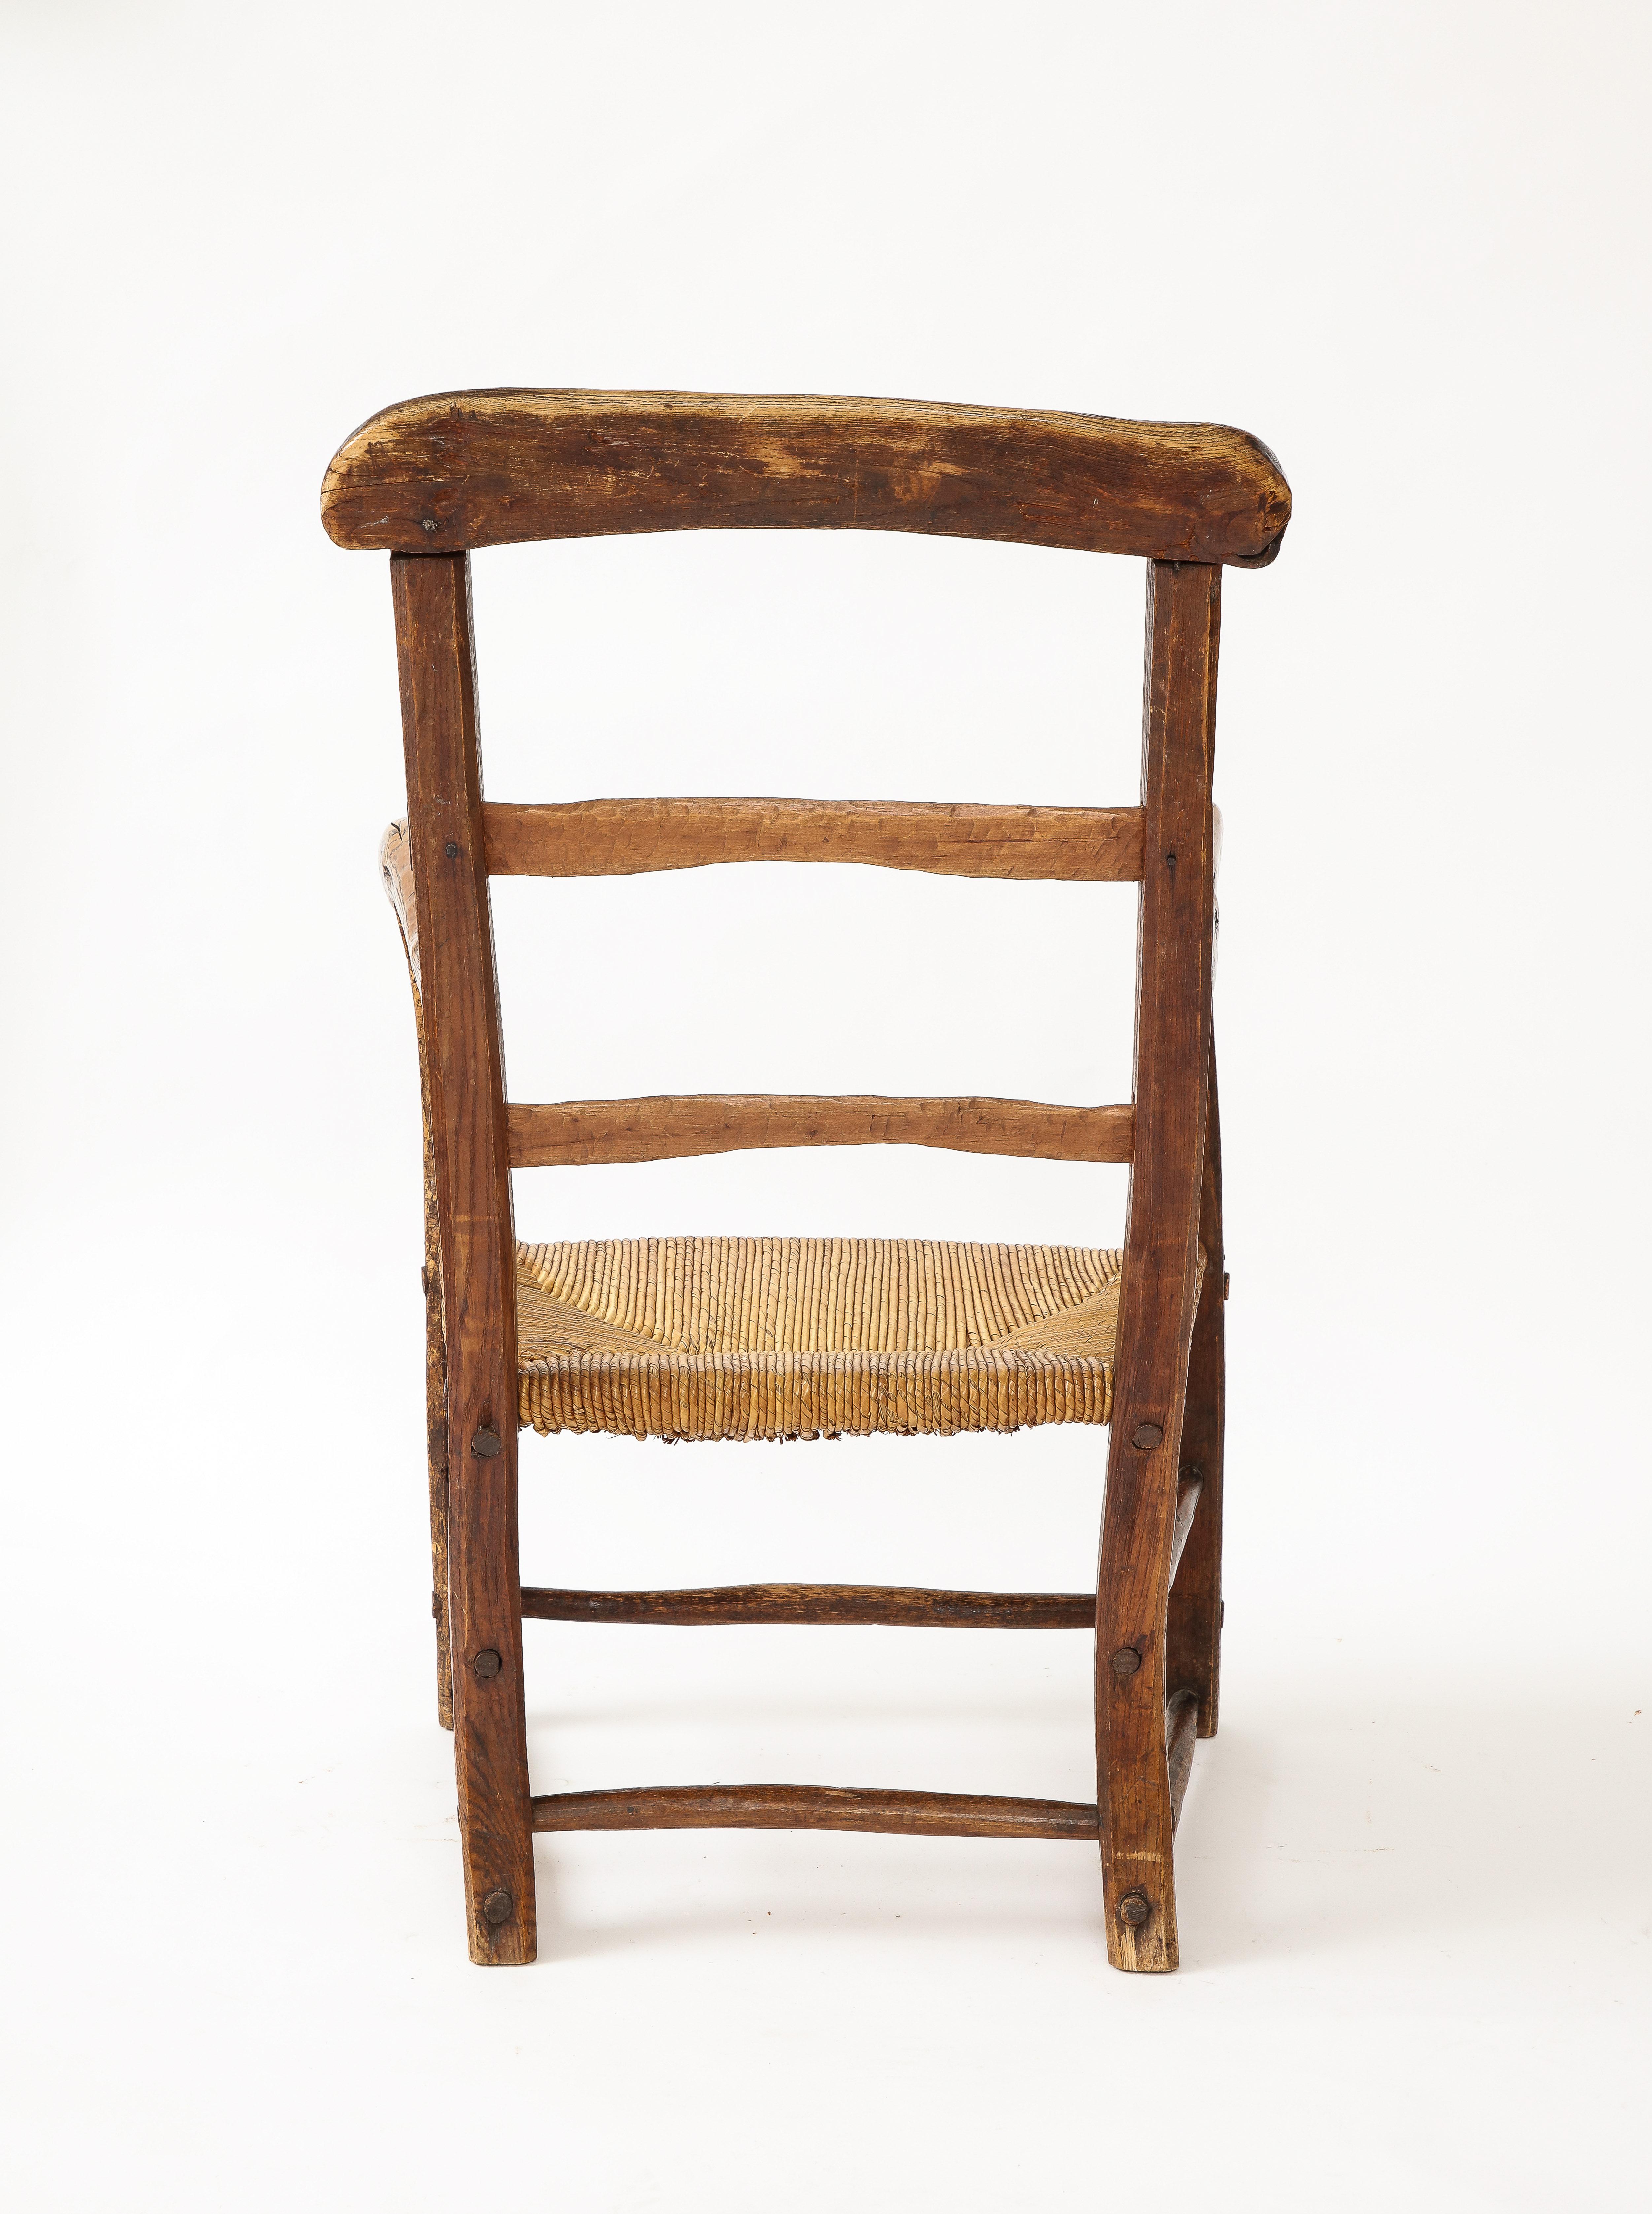 19th Century Rustic French Chair with Straw Seat For Sale 9